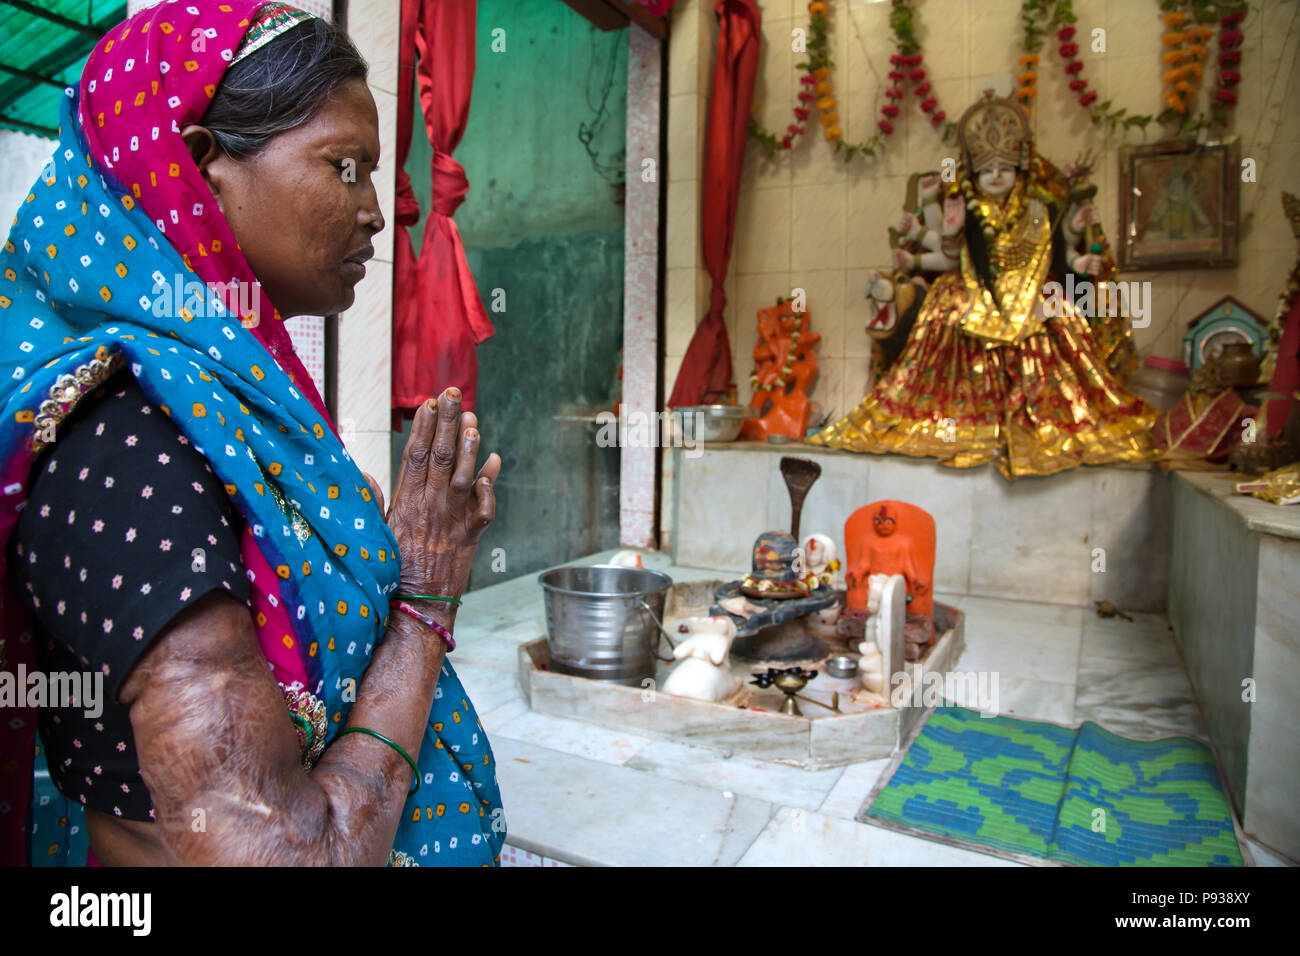 Woman victim of Acid attack praying in temple in Agra (from Stop Acid Attacks campaign, India) Stock Photo